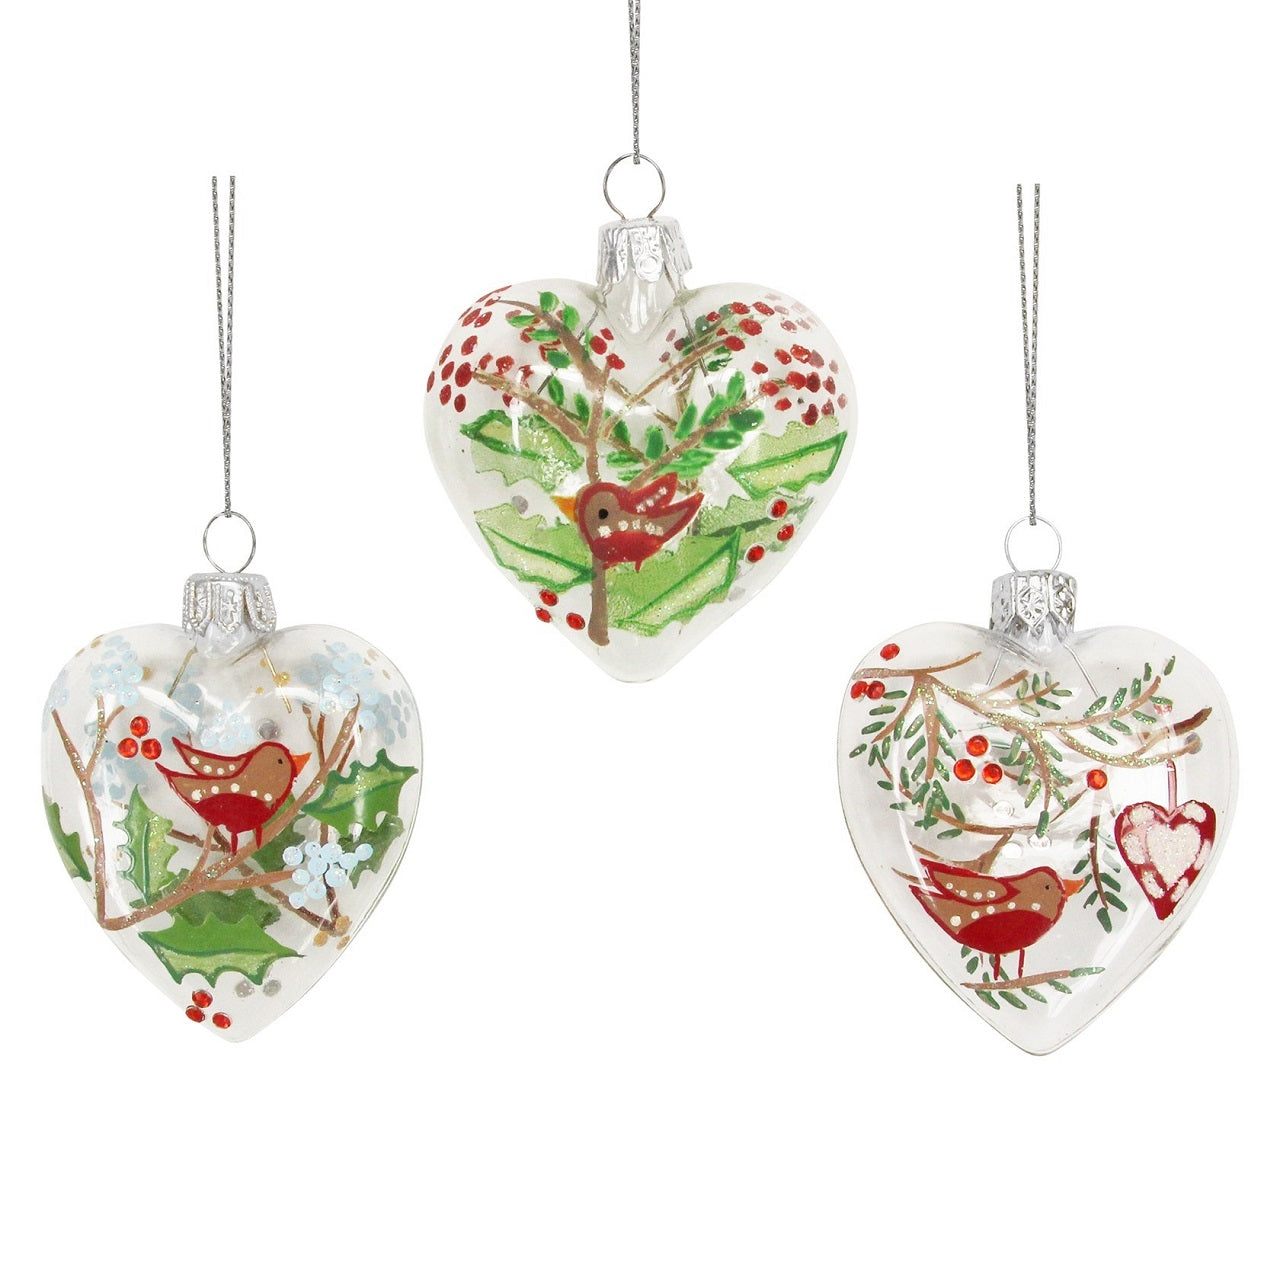 Gisela Graham Heart-Shaped Bauble with Robin Christmas Decoration - Blue  Browse our beautiful range of luxury Christmas tree decorations and ornaments for your tree this Christmas.  Add style to your Christmas tree with this beautiful heart-shaped glass bauble decorated with a robin Christmas hanging ornament.